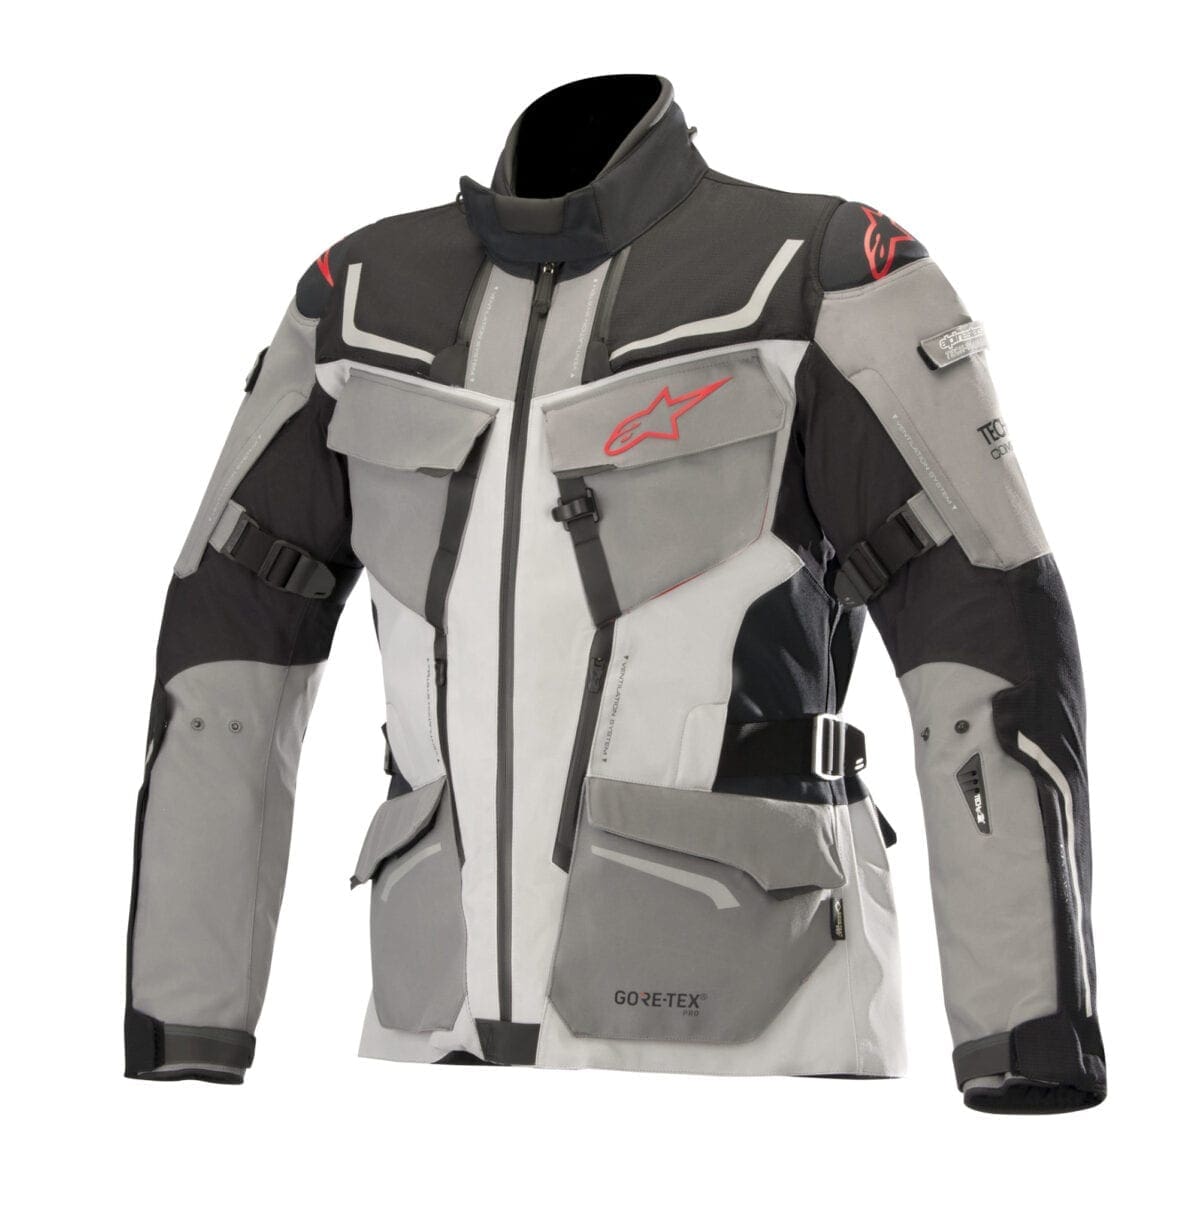 Alpinestars new and improved 2018 collection unveiled